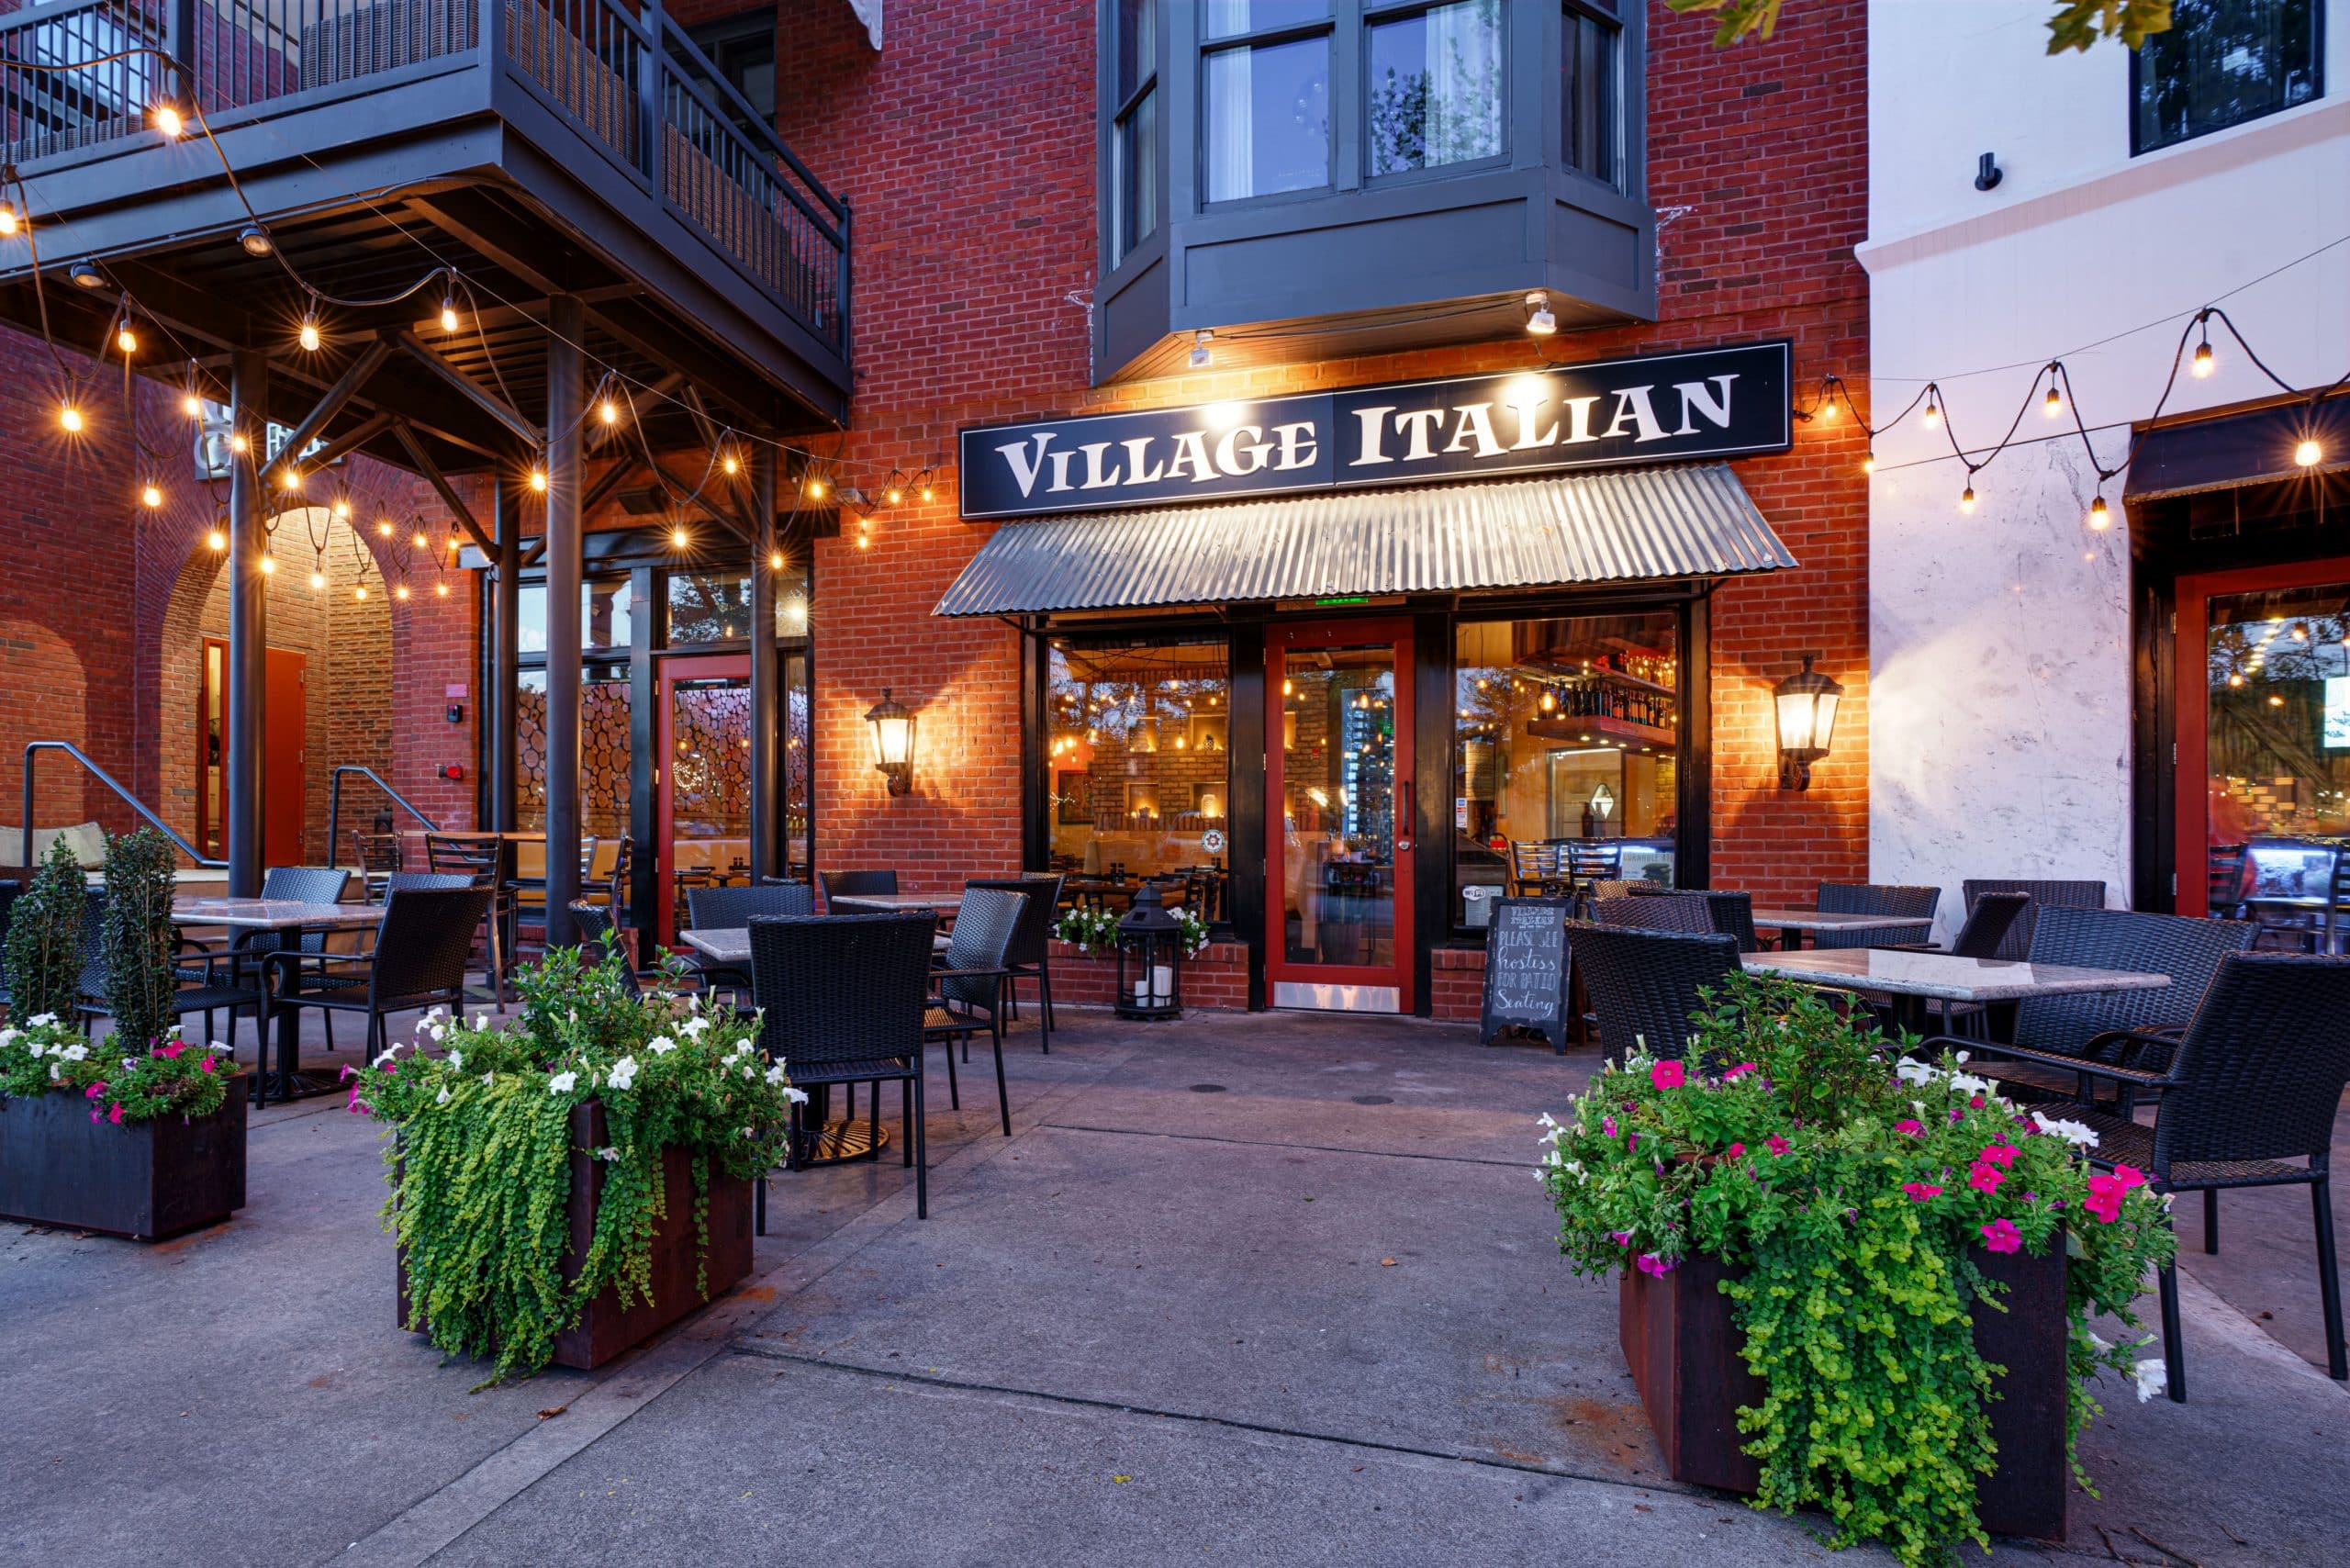 Exterior view of Village Italian restaurant with string lights and outdoor seating.